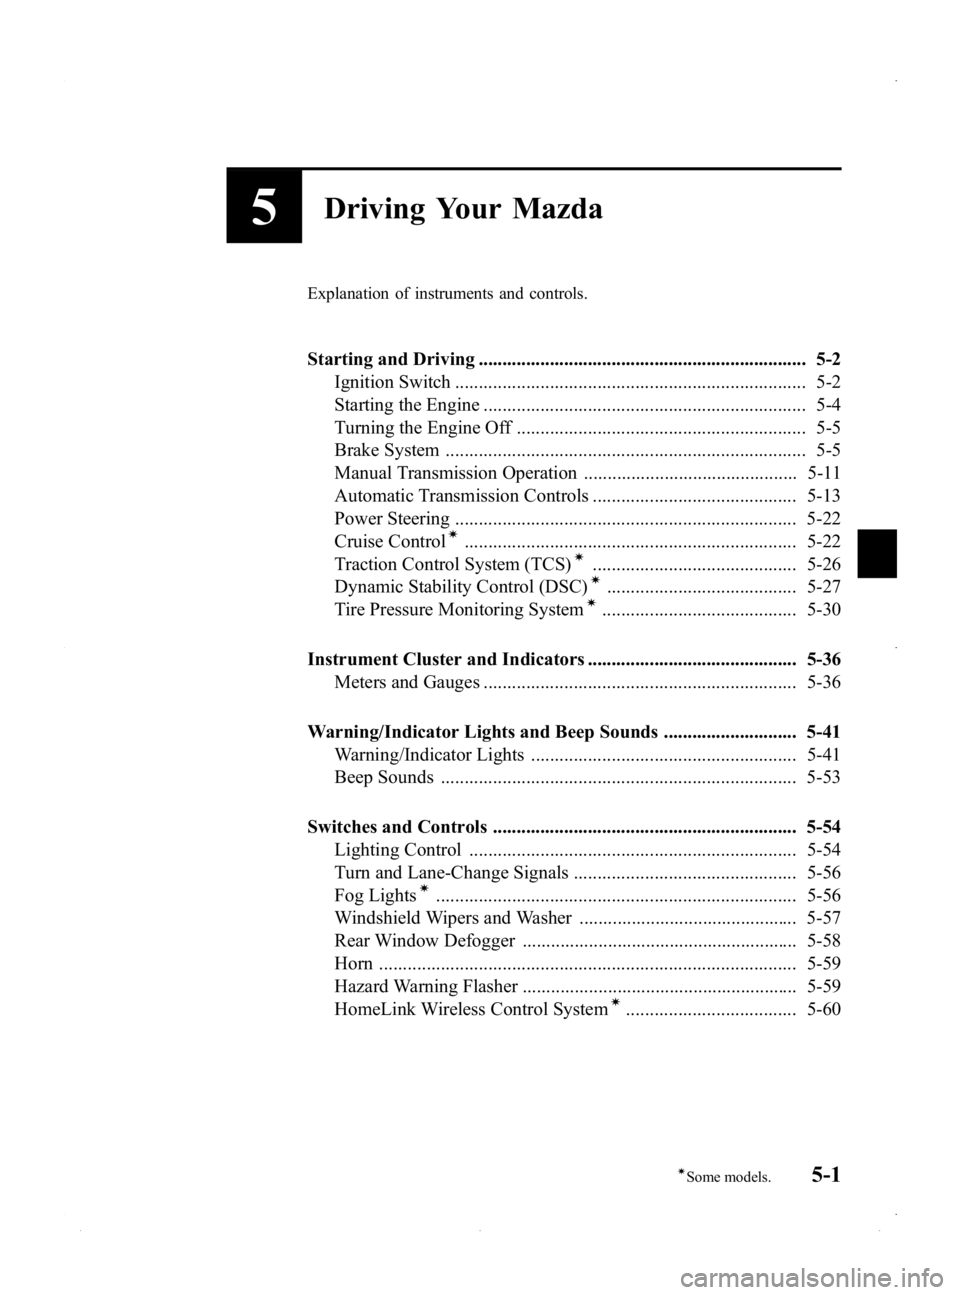 MAZDA MODEL MX-5 MIATA PRHT 2015  Owners Manual Black plate (145,1)
5Driving Your Mazda
Explanation of instruments and controls.
Starting and Driving ..................................................................... 5-2Ignition Switch .........